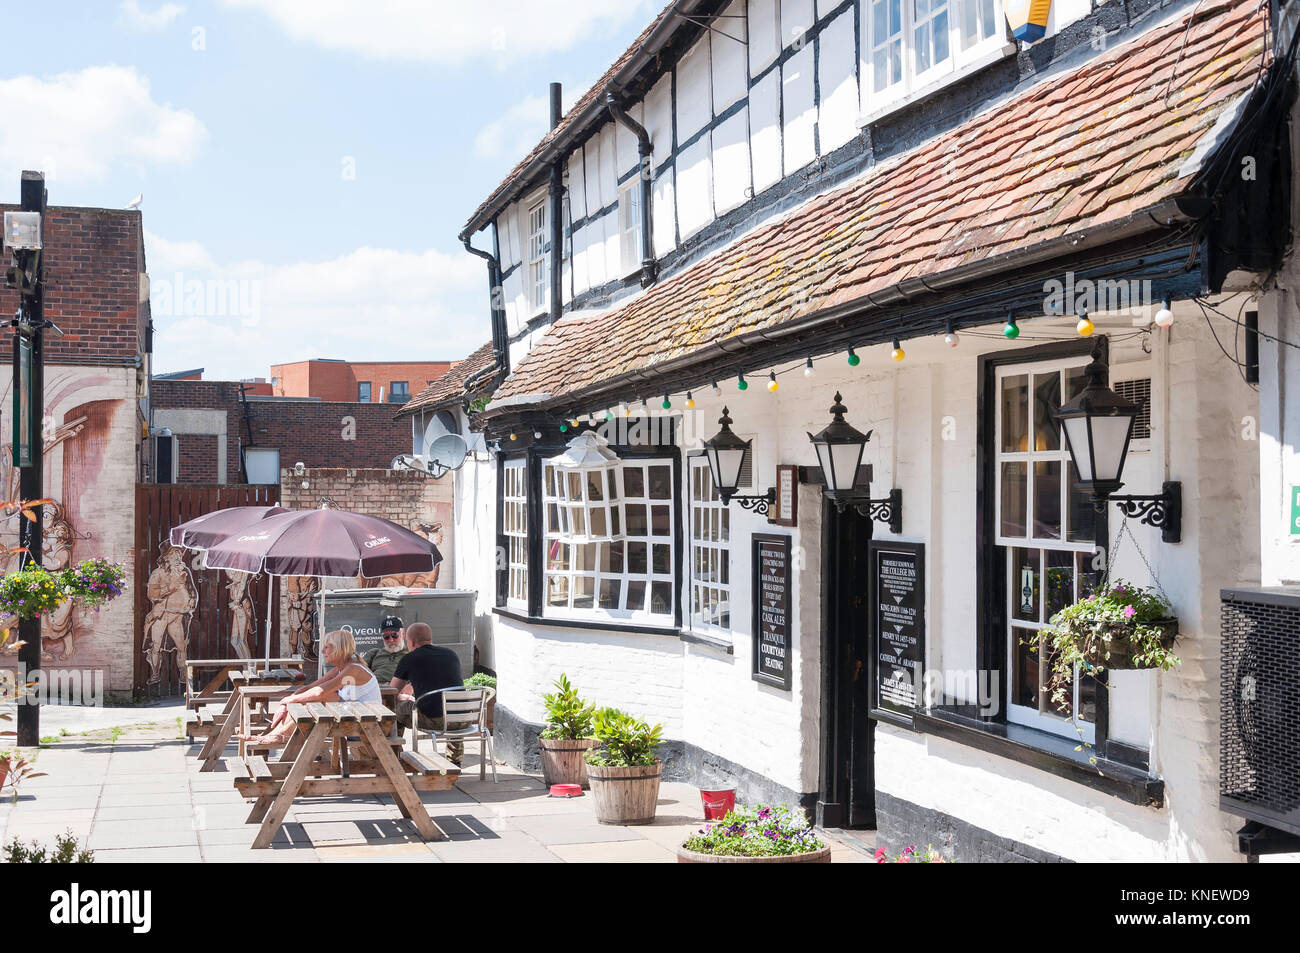 The courtyard of the 17th century The Angel Inn, High Street, Andover, Hampshire, England, United Kingdom Stock Photo